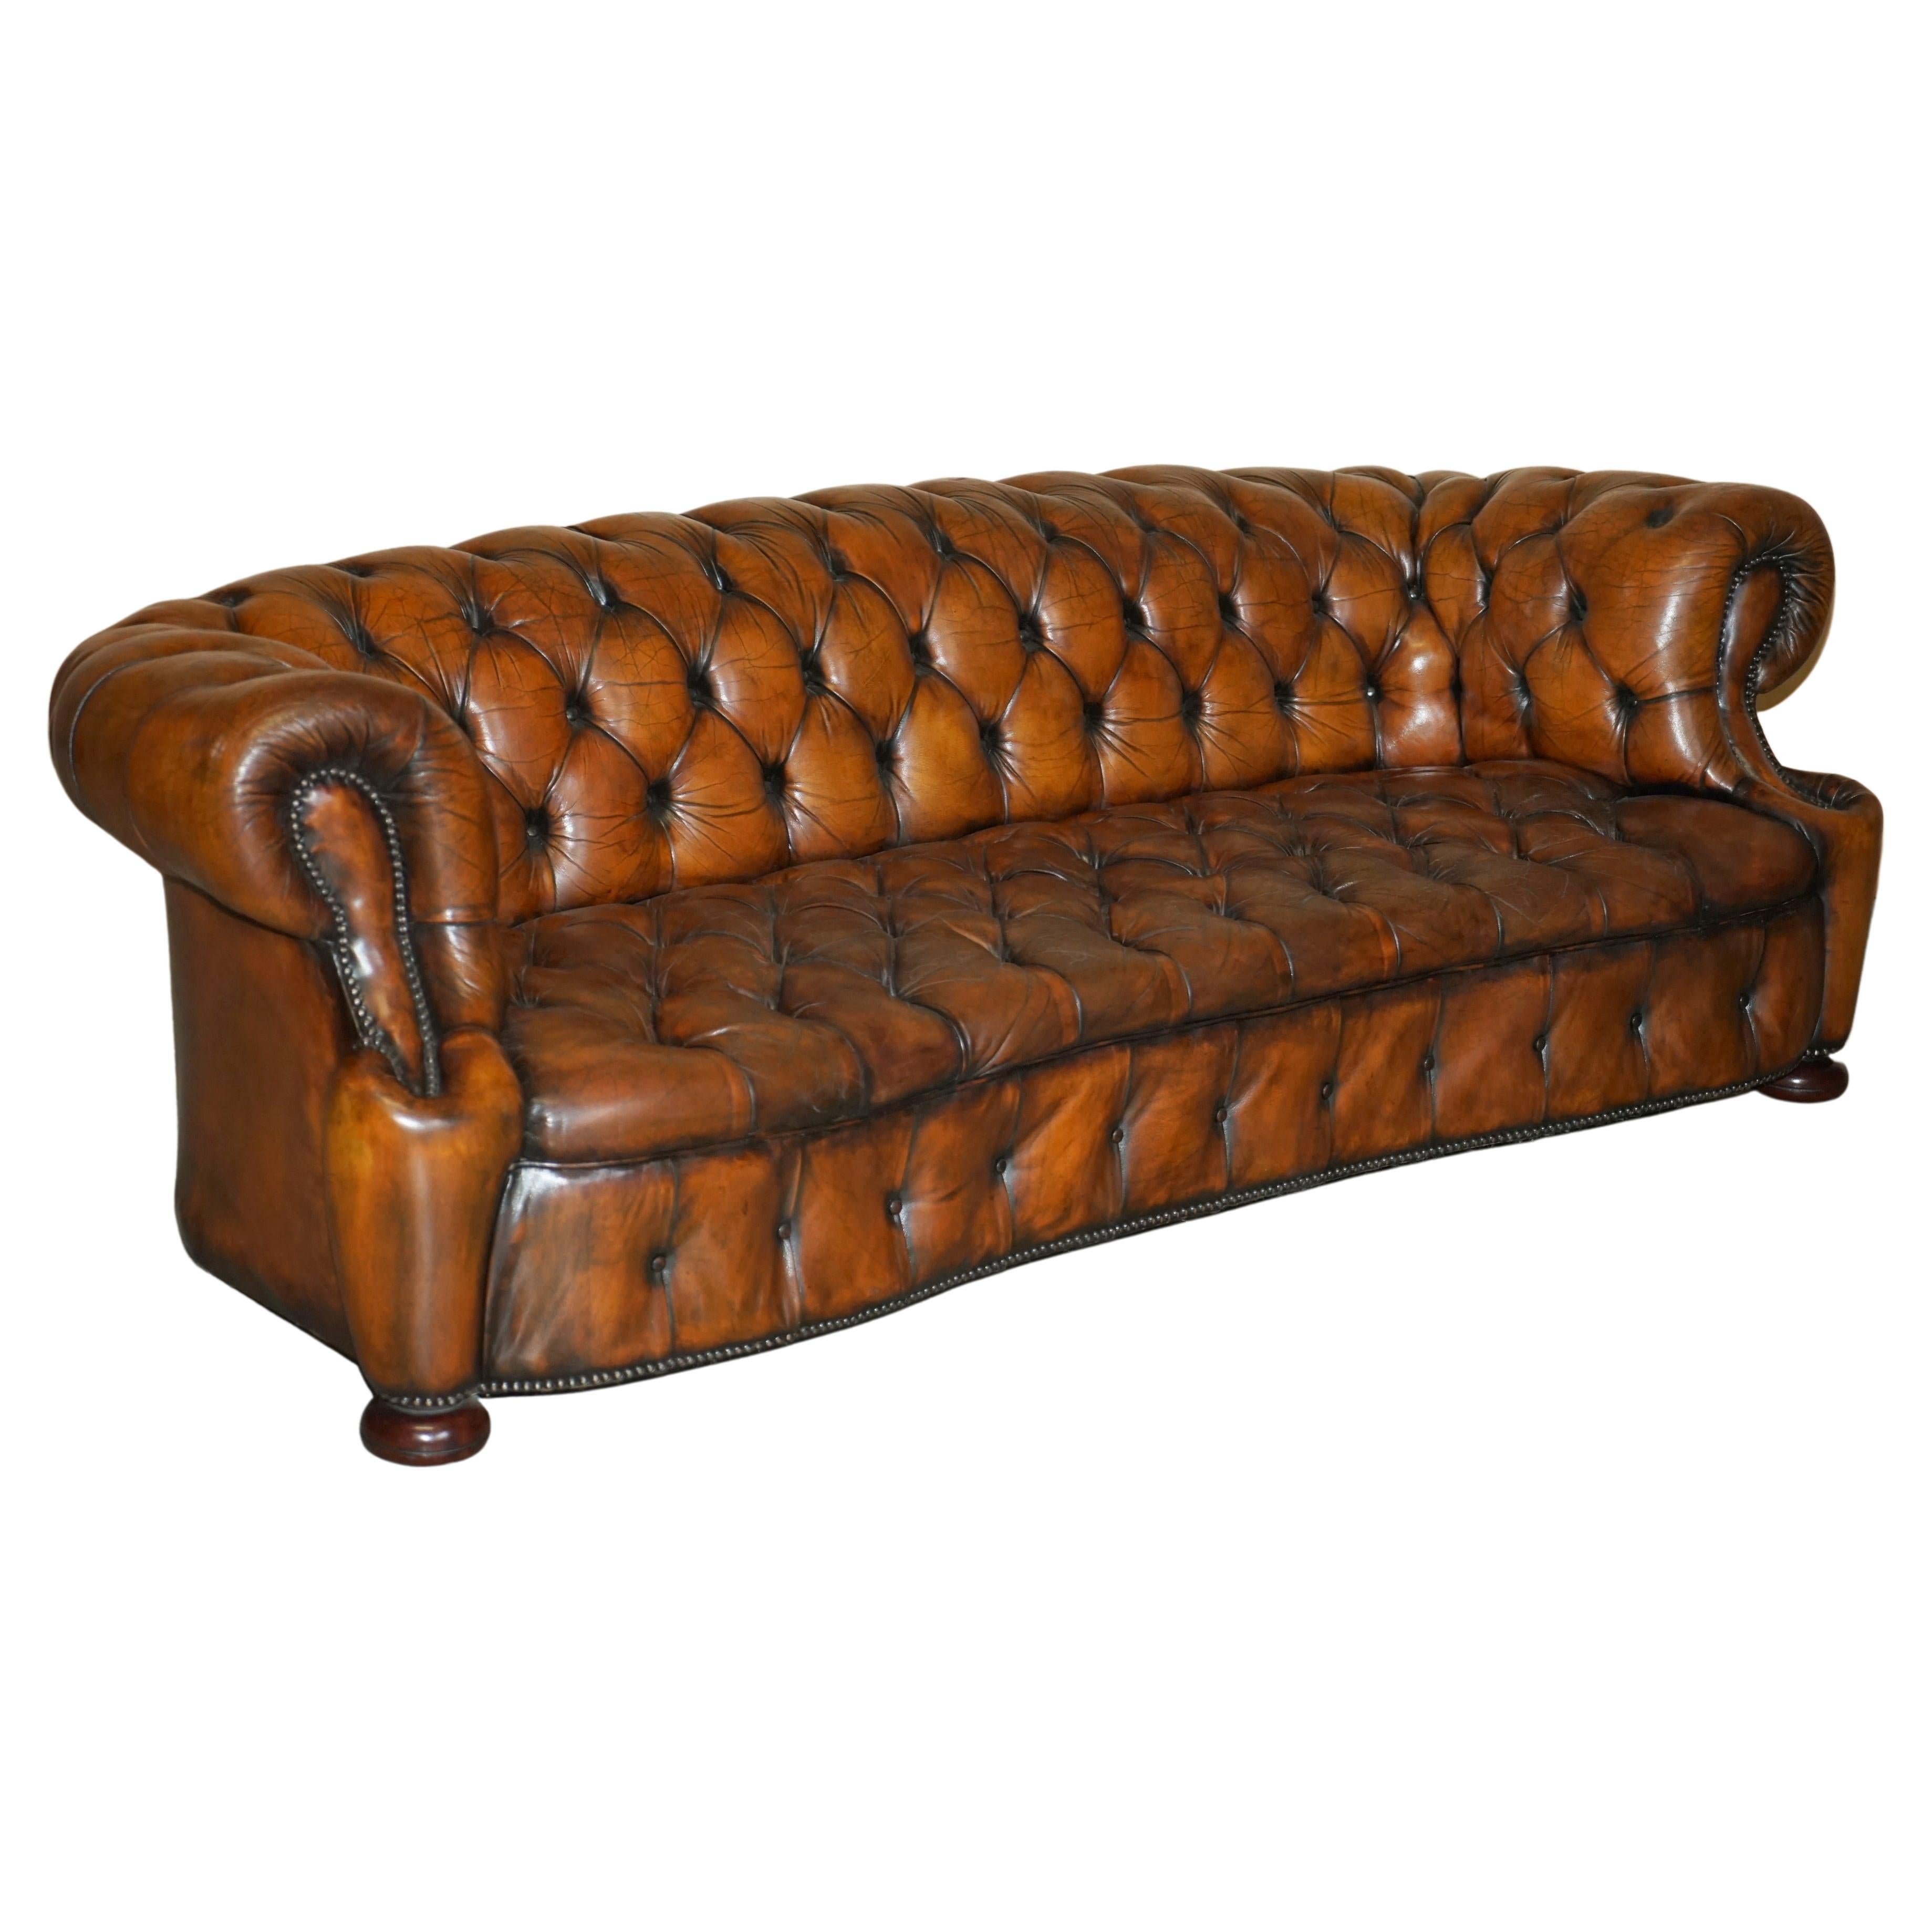 Unique Restored Curved Vintage Chesterfield Tufted Cigar Brown Leather Sofa